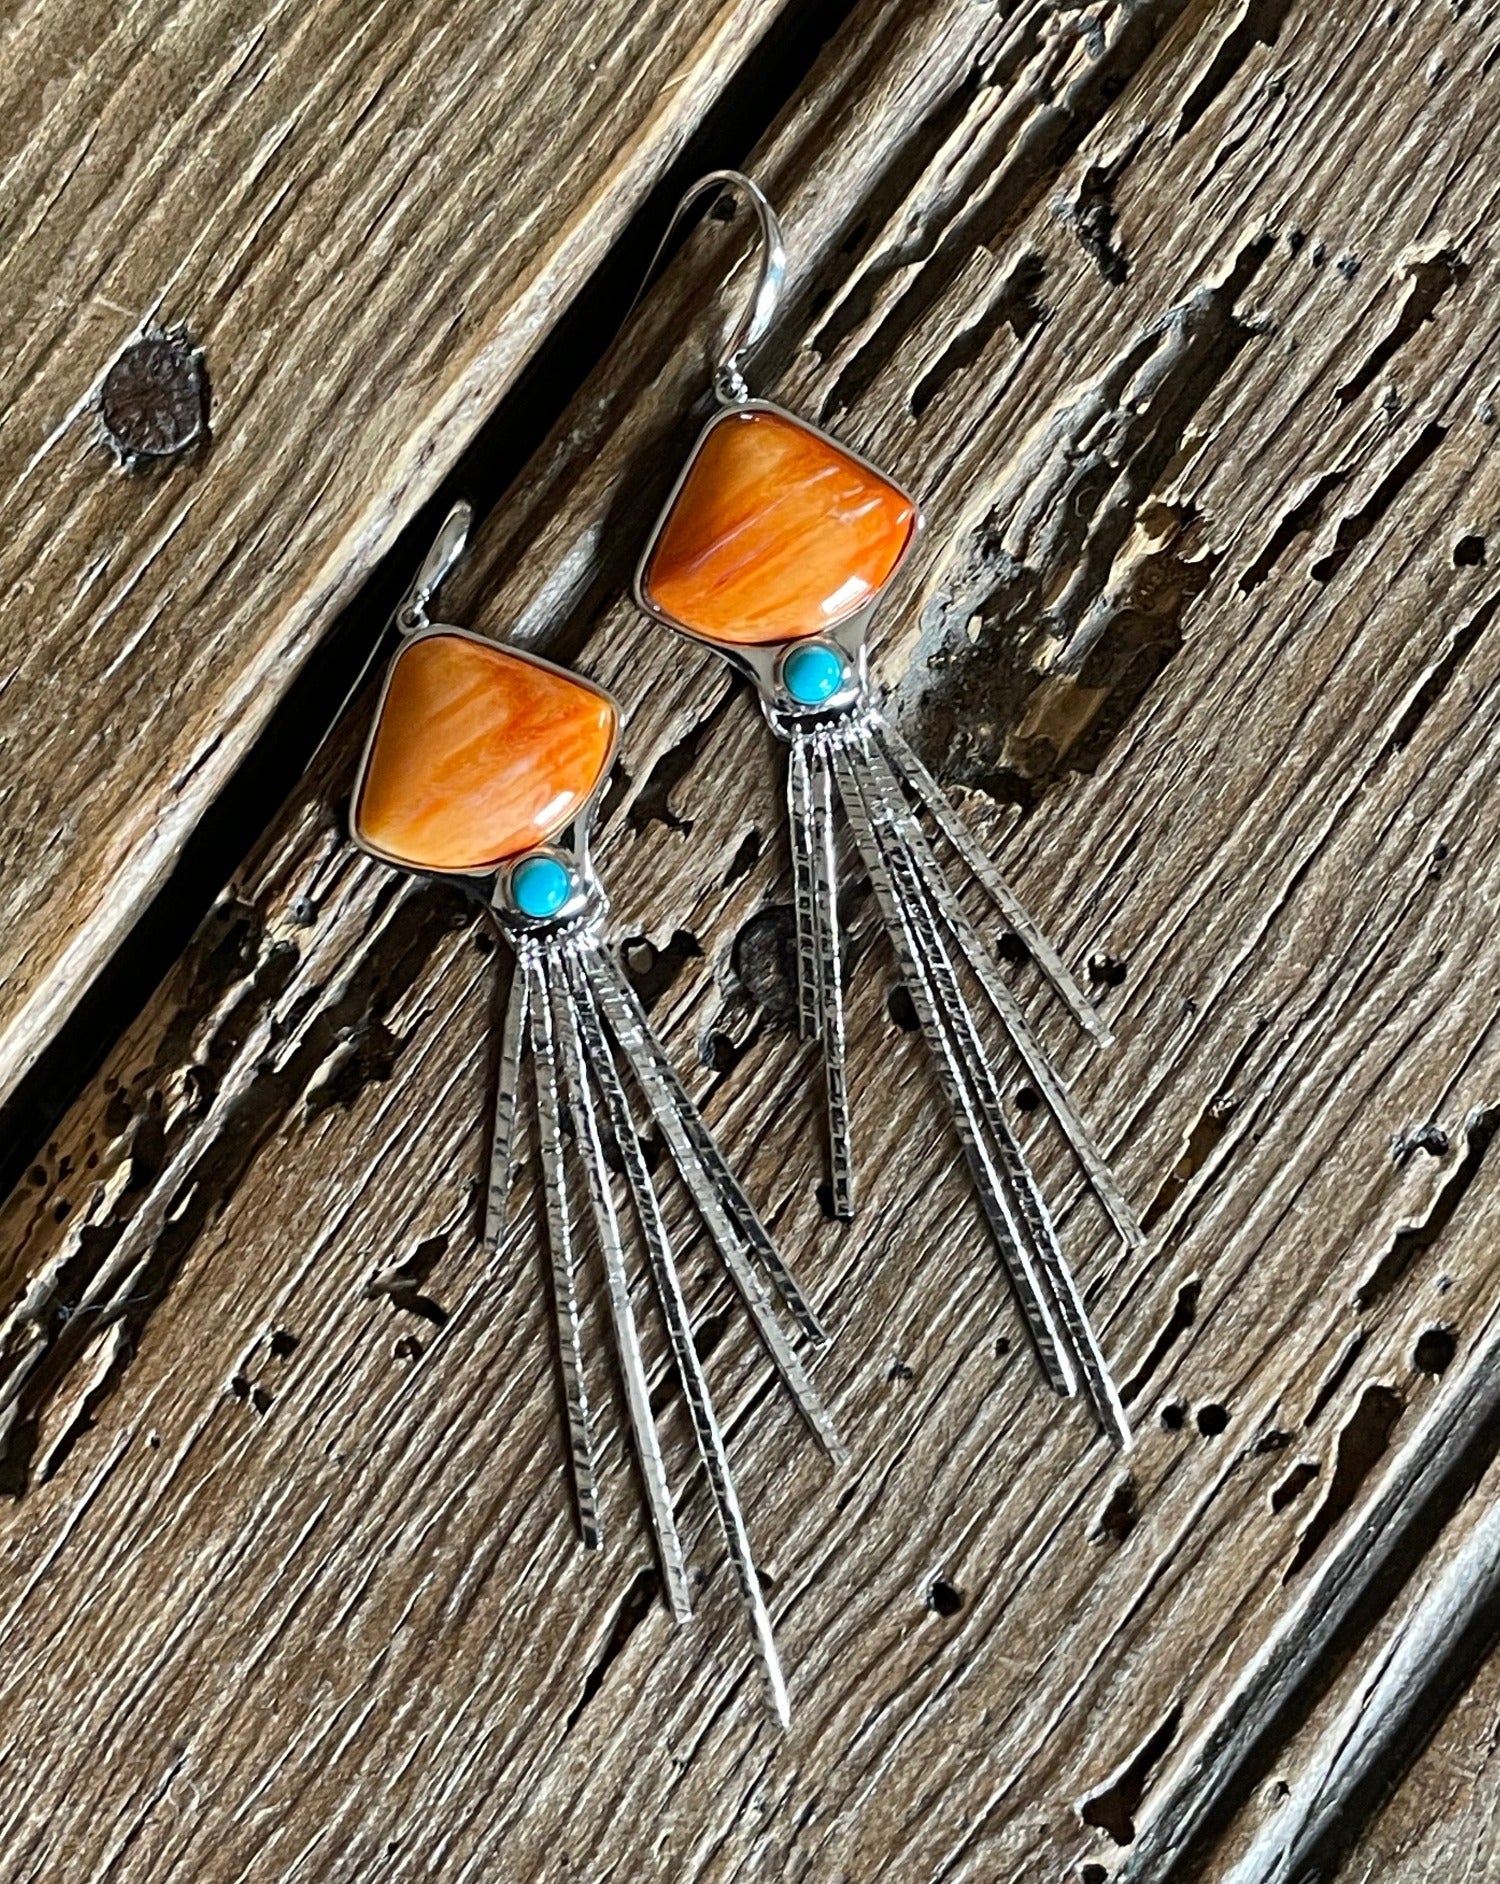 Sterling silver dangle earrings with Orange Spiny main stone and small turquoise secondary stone